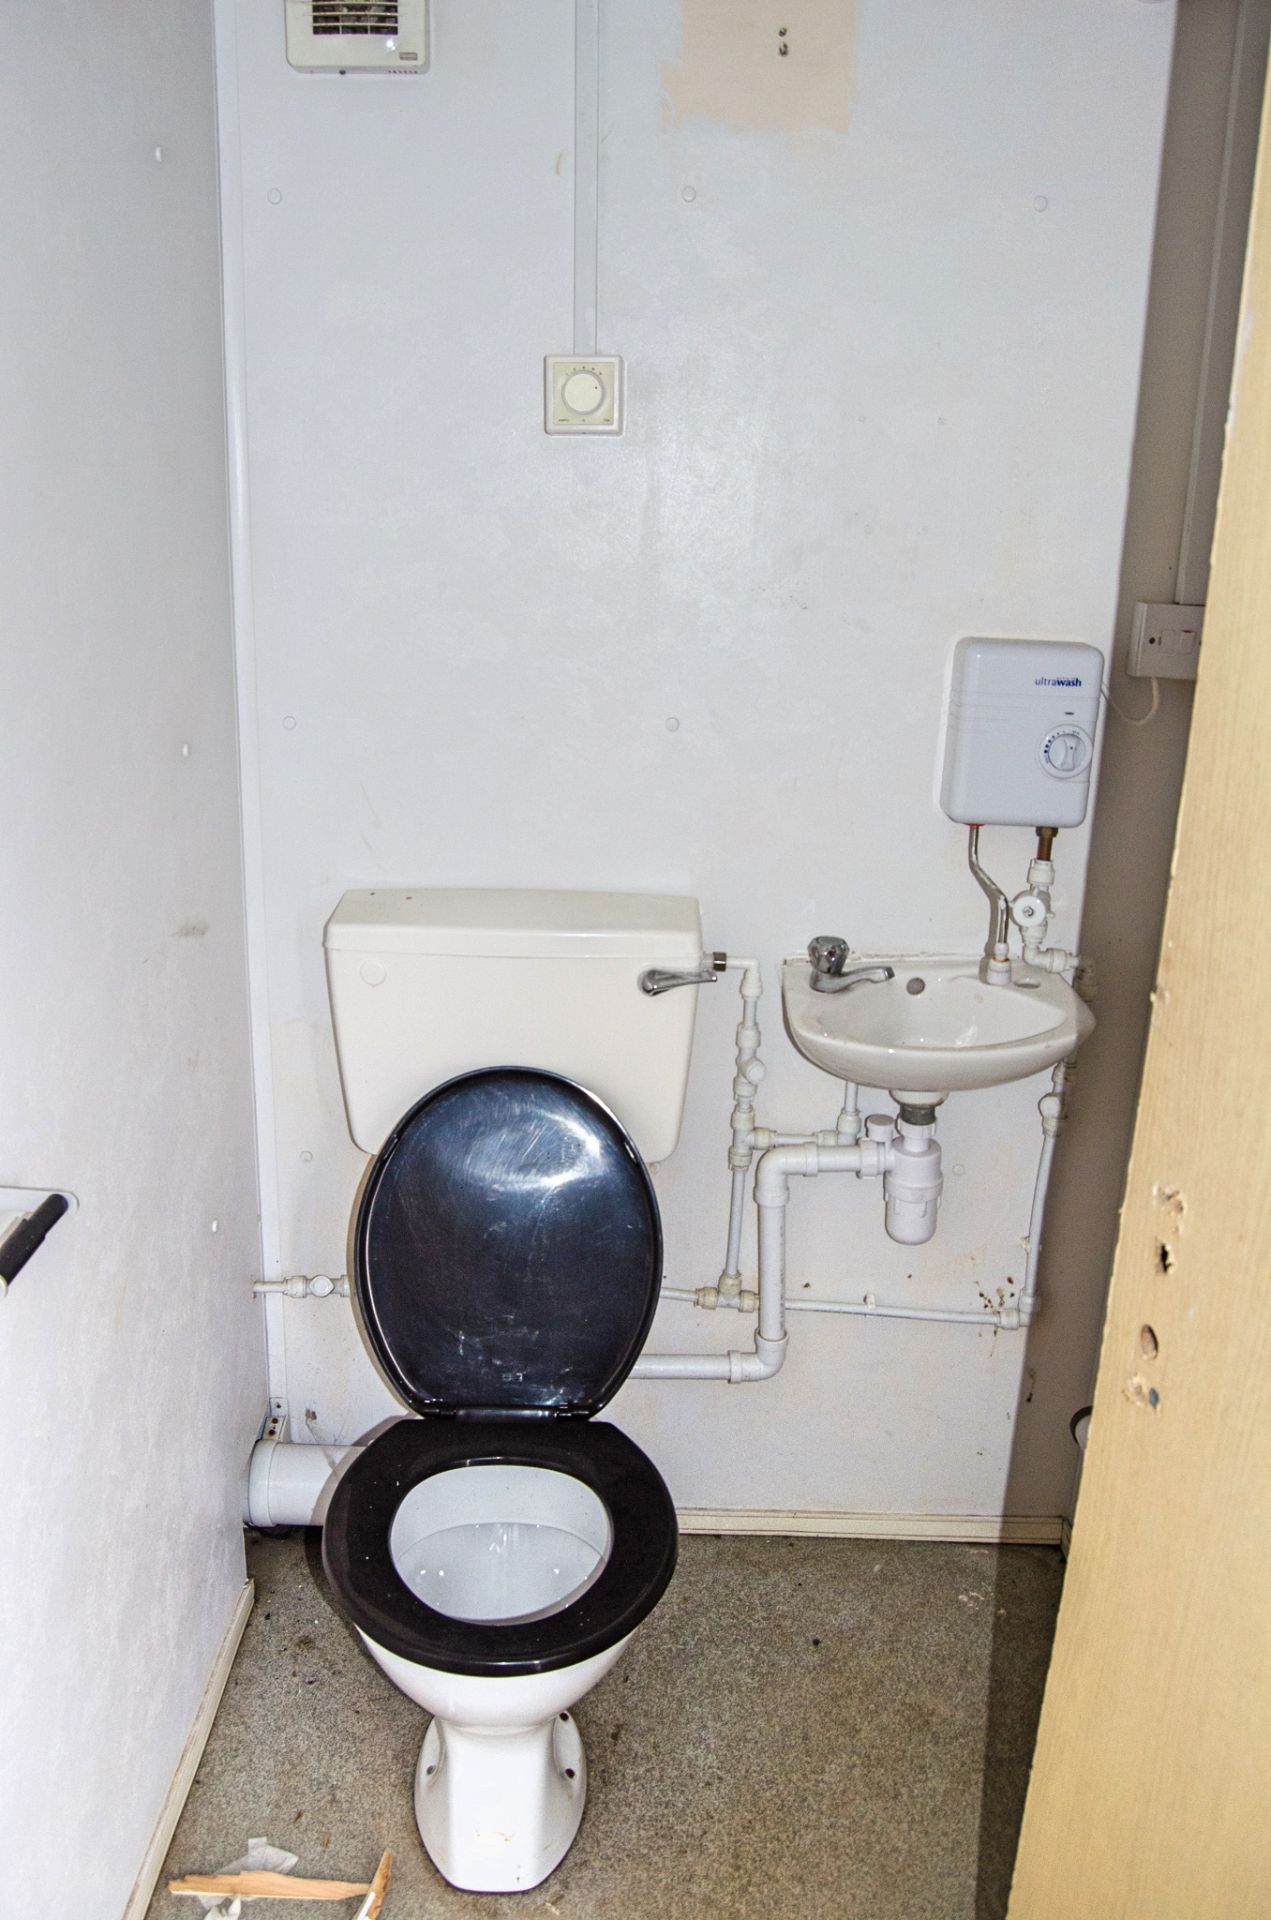 32ft x 10ft steel 4+2 toilet site unit Comprising of: Gents toilet(4 - cubicles, 2 - urinals & - Image 11 of 11